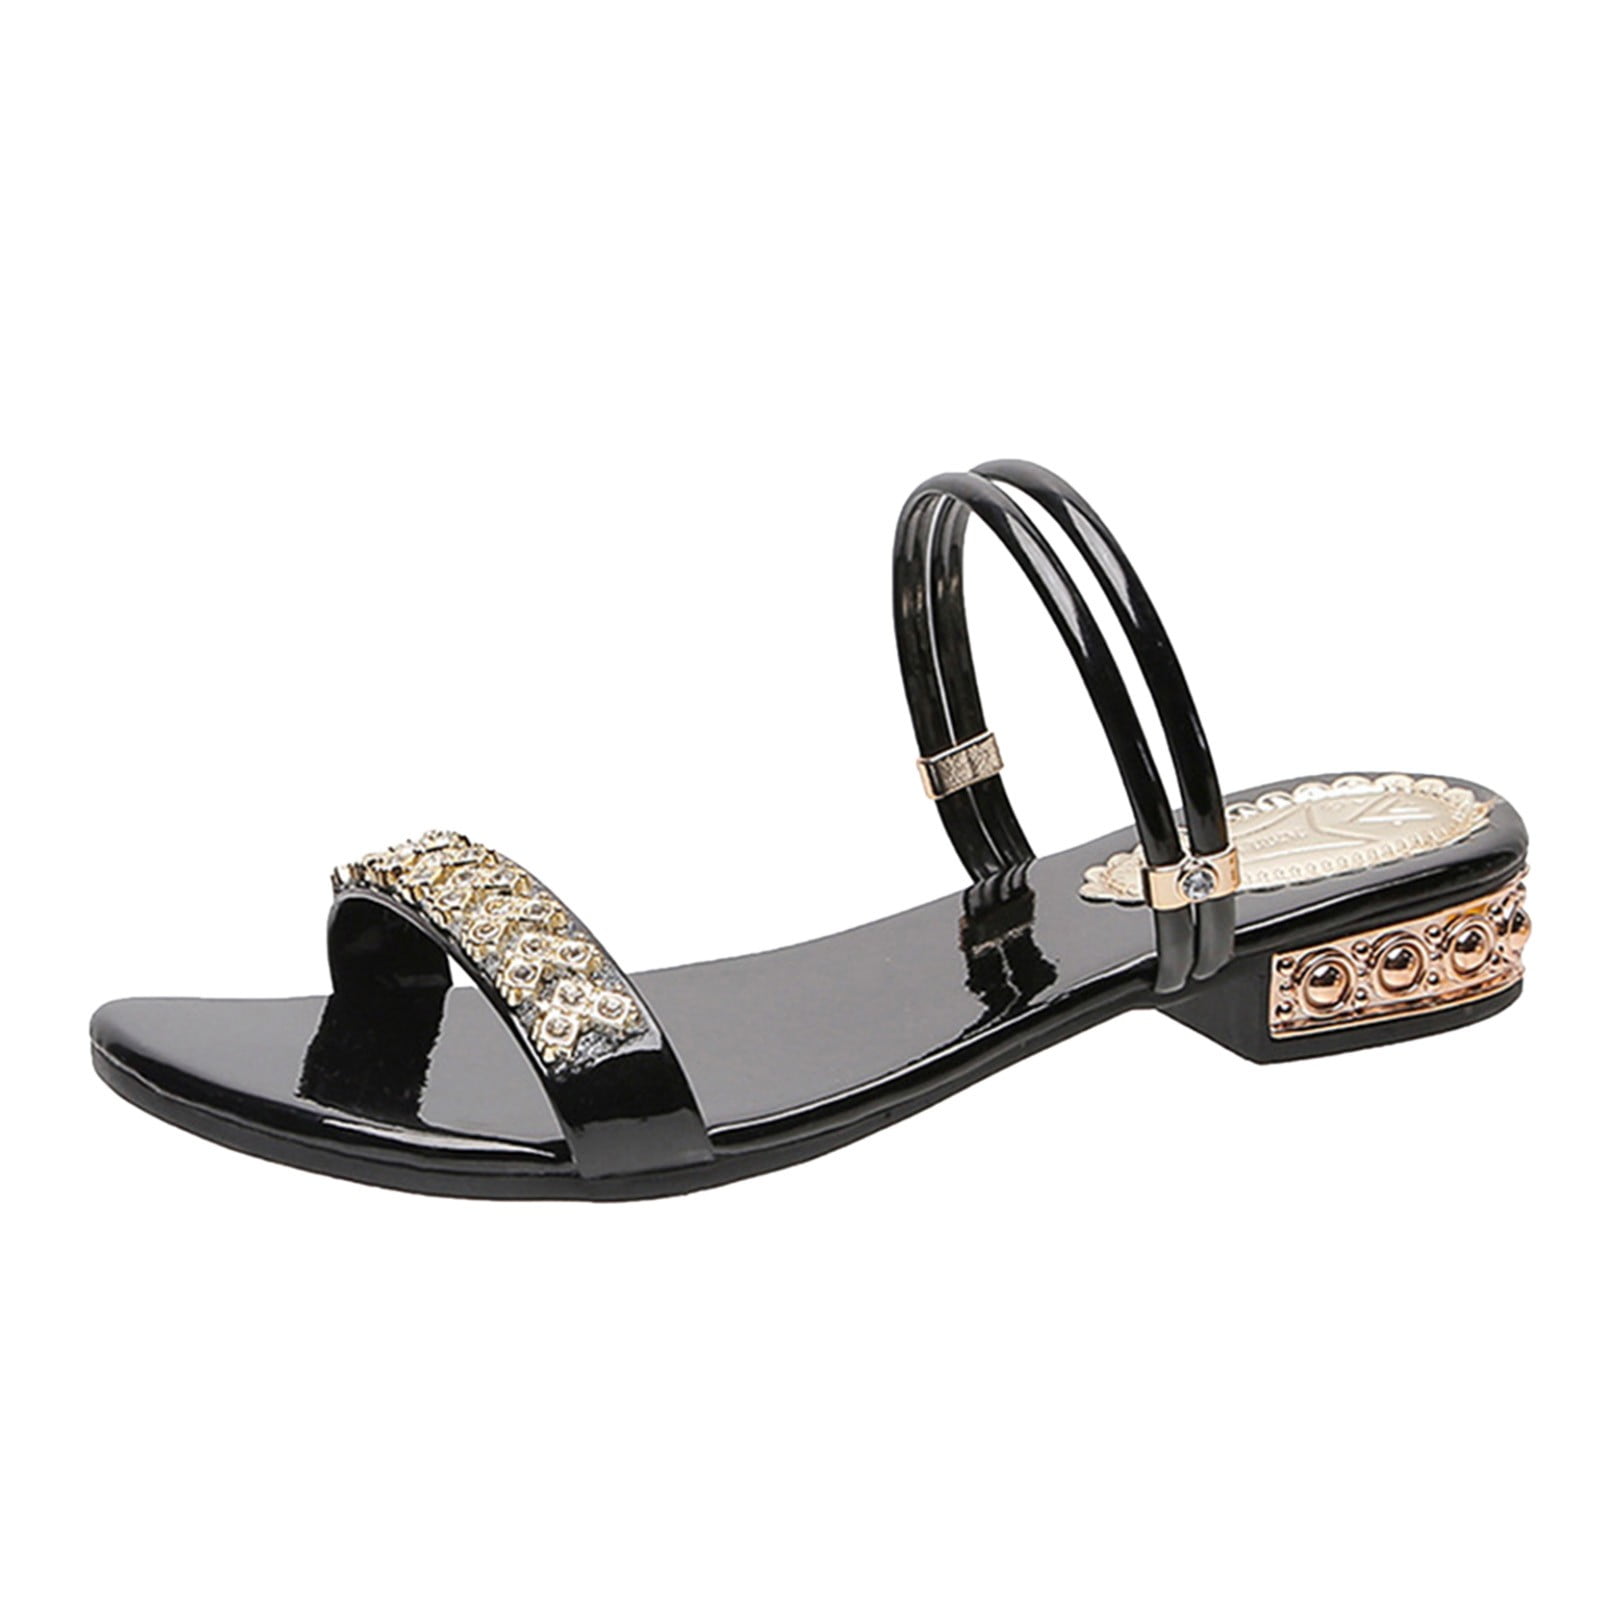 Toe Wedge Sandals And Open Women Heeled High Breathable Summer Strap ...